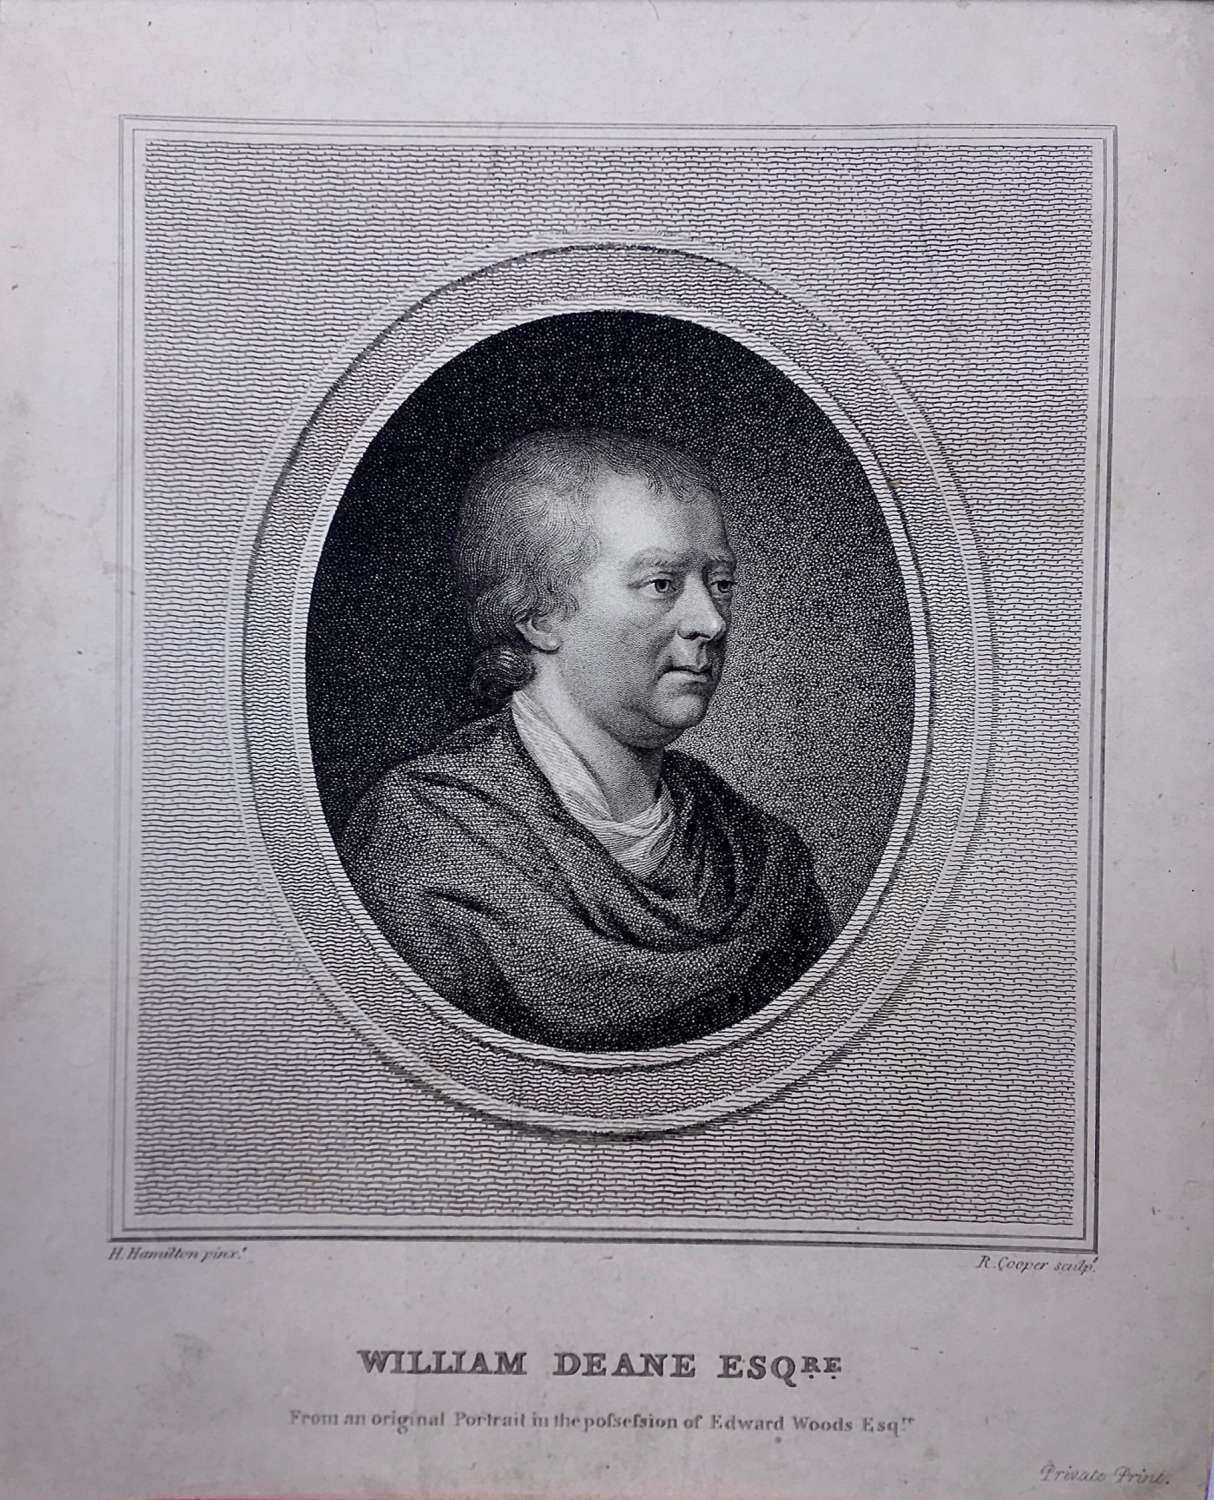 A rare privately issued portrait engraving of William Deane (d. 1793)